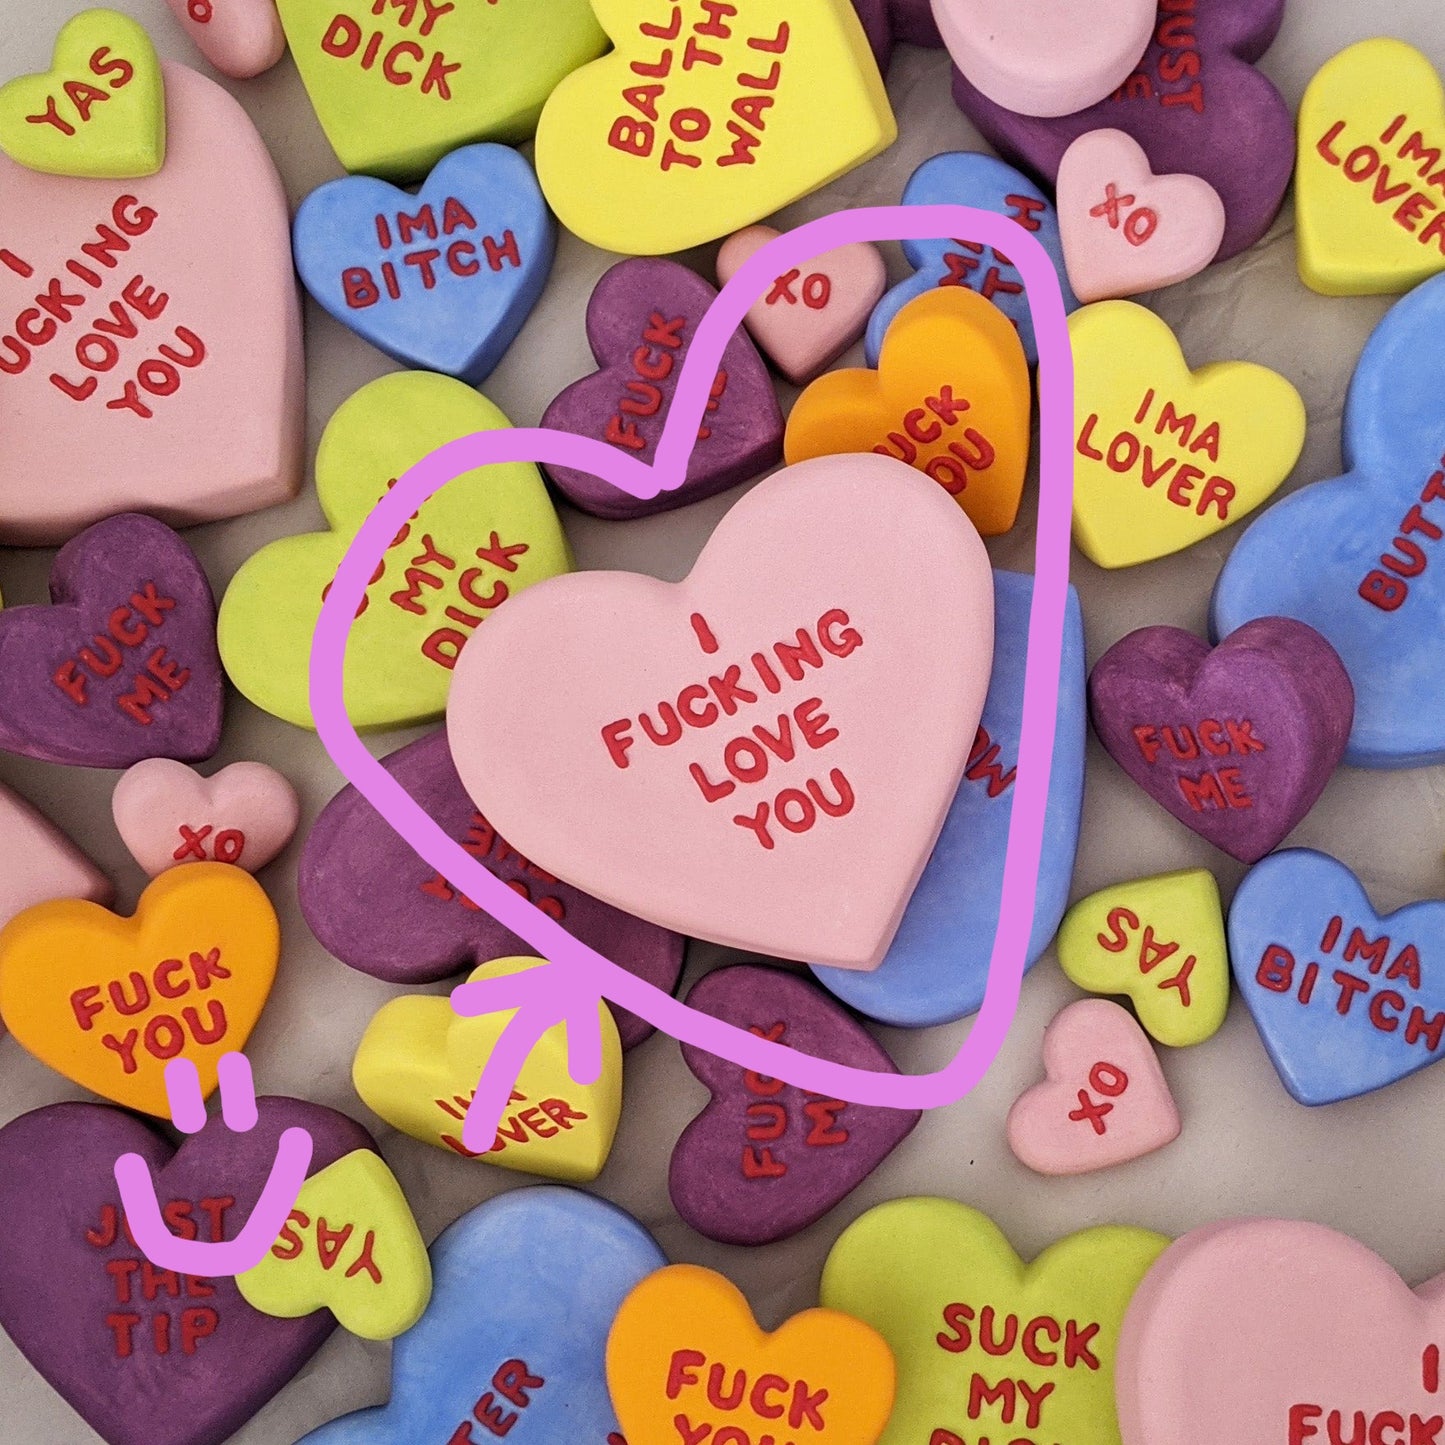 "I F***ING LOVE YOU" Porcelain Puffy Conversational Heart